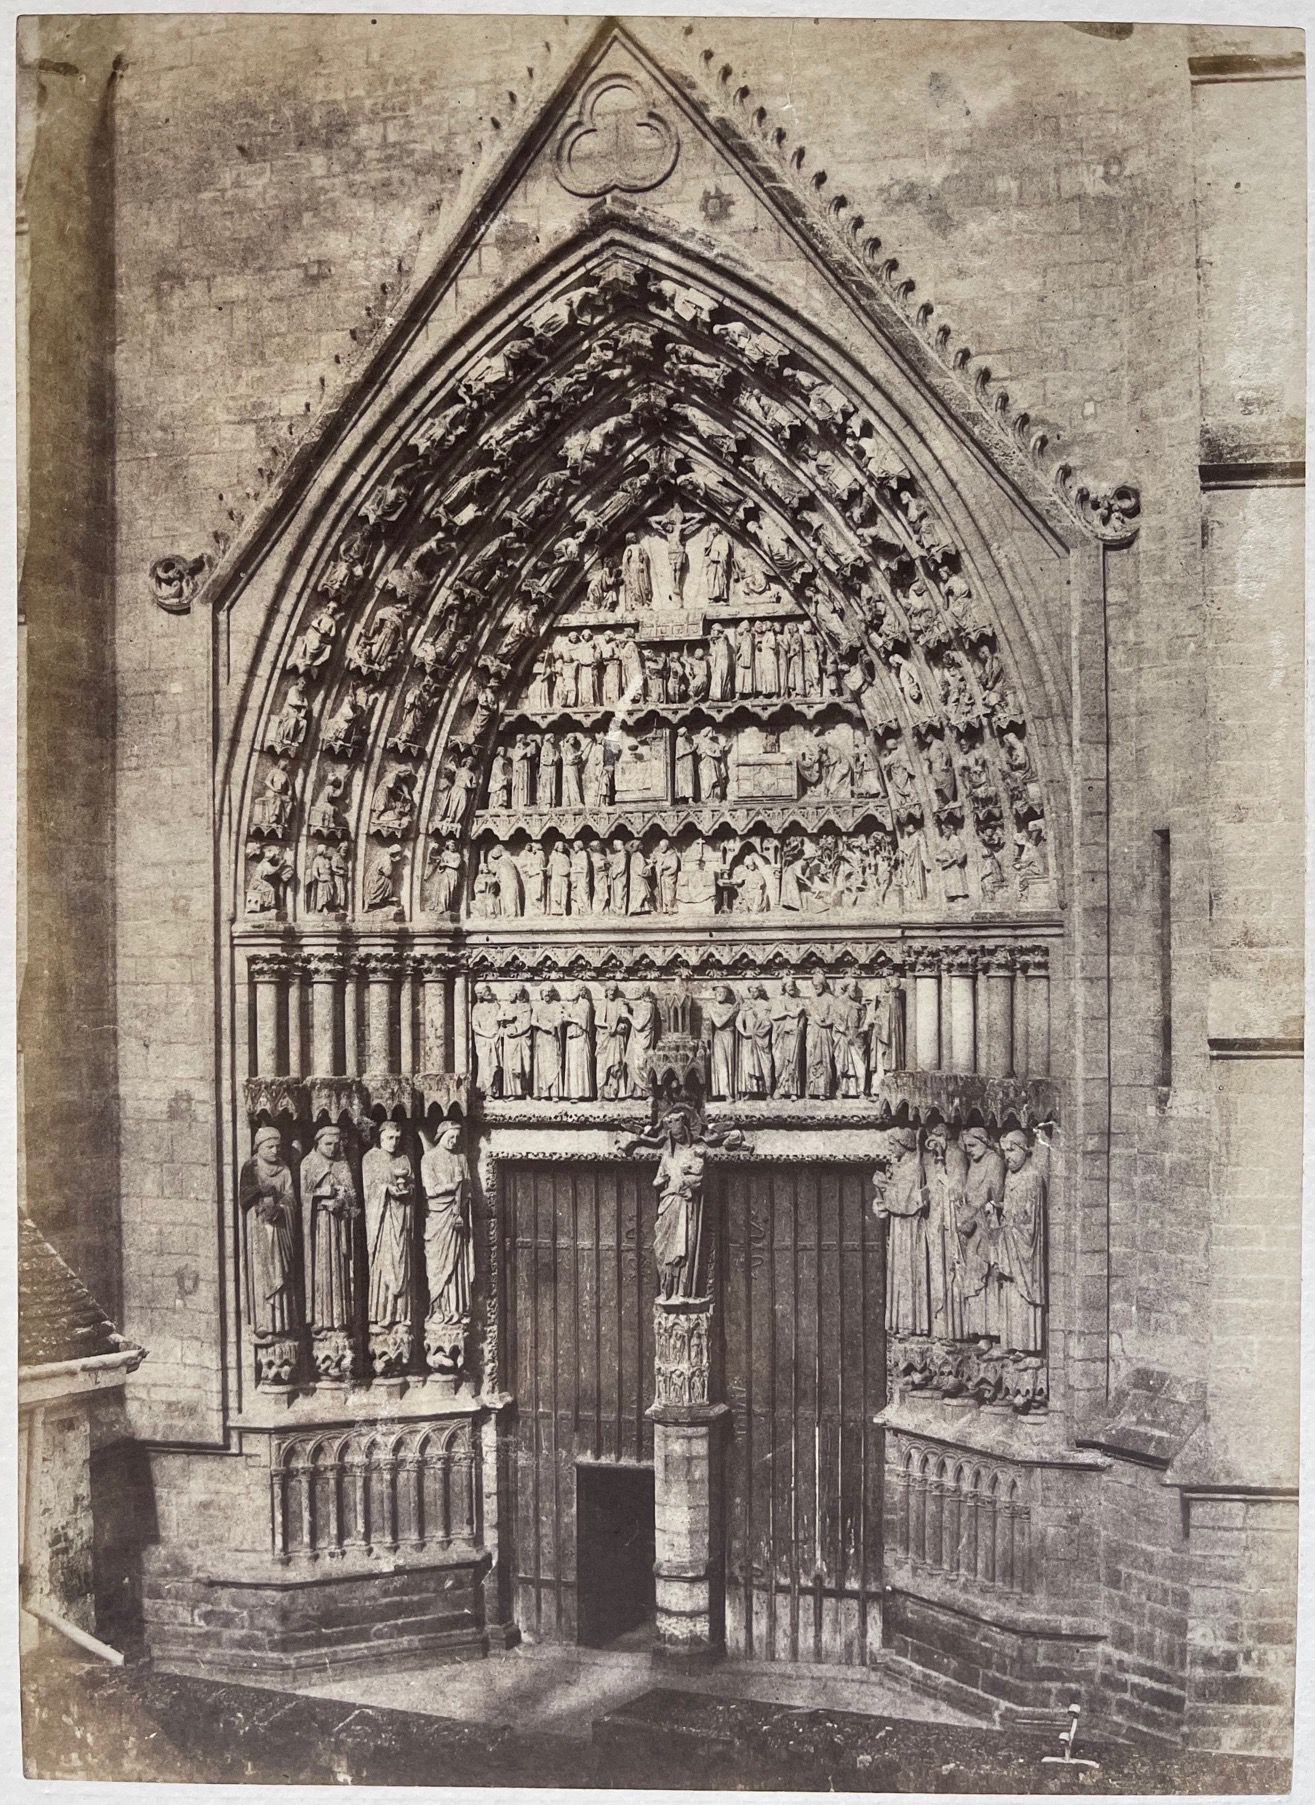 CHARLES BOSSU DIT MARVILLE (1813-1879) Lateral Porch, Amiens Cathedral, 1853 Sal&hellip;